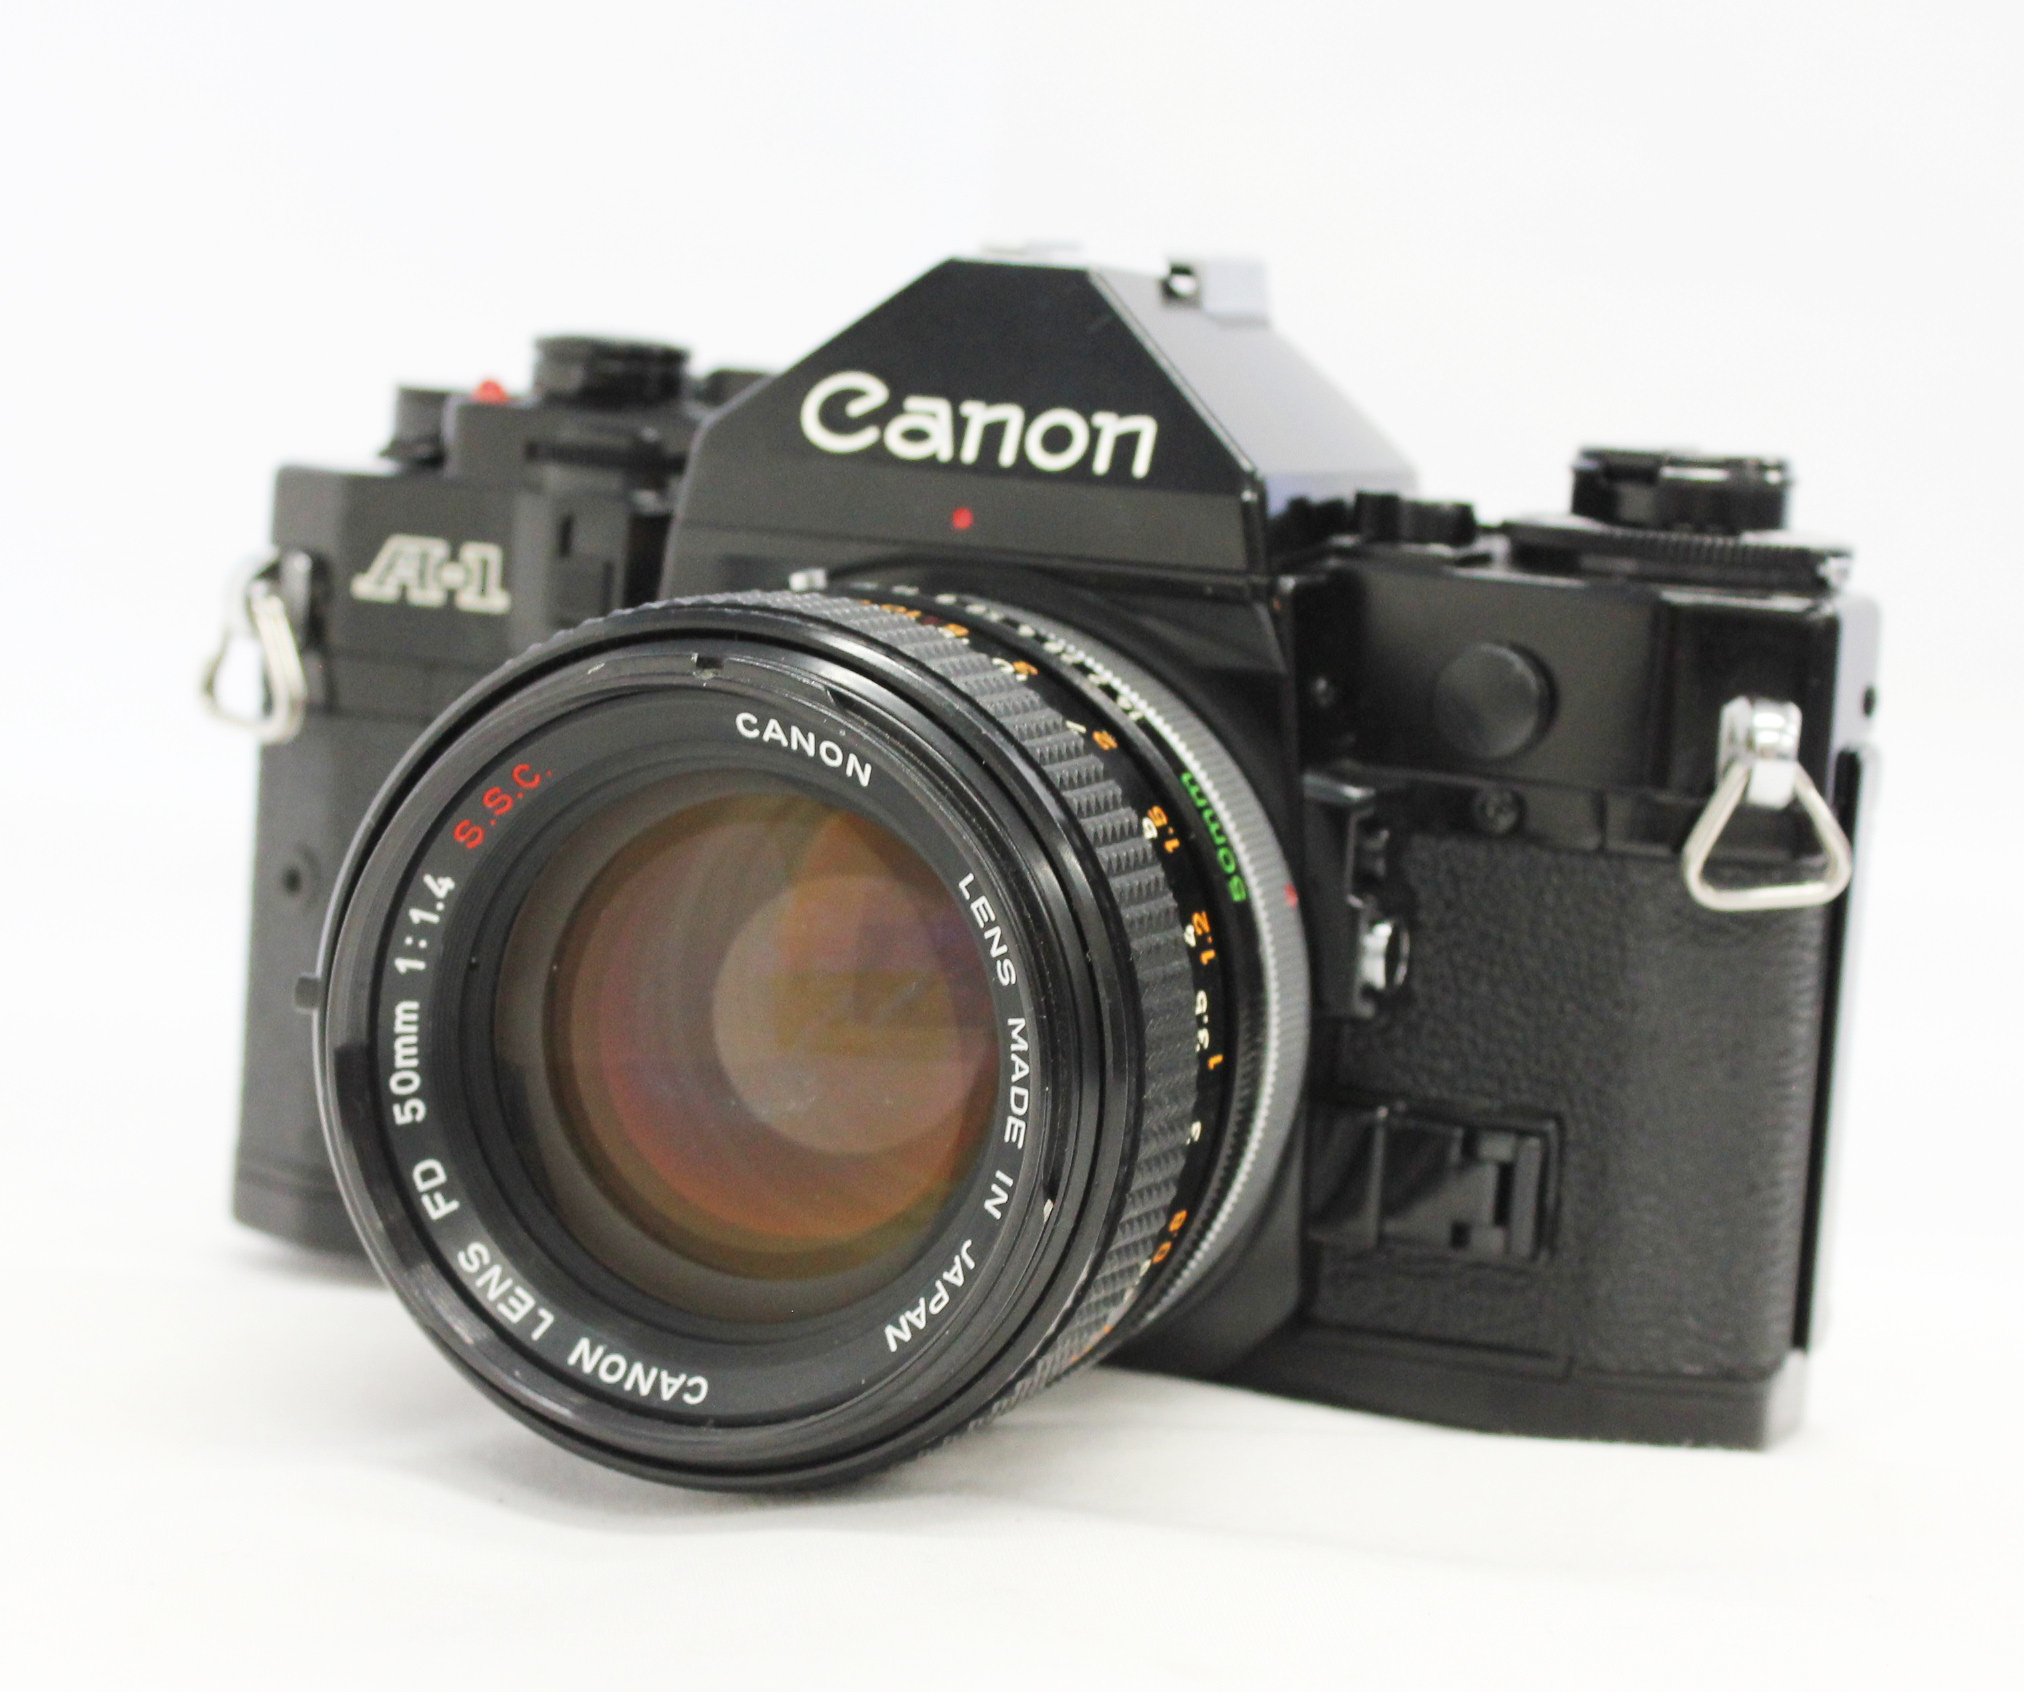 Japan Used Camera Shop | [Excellent+++] Canon A-1 35mm SLR Film Camera with FD 50mm F/1.4 S.S.C. Lens from Japan